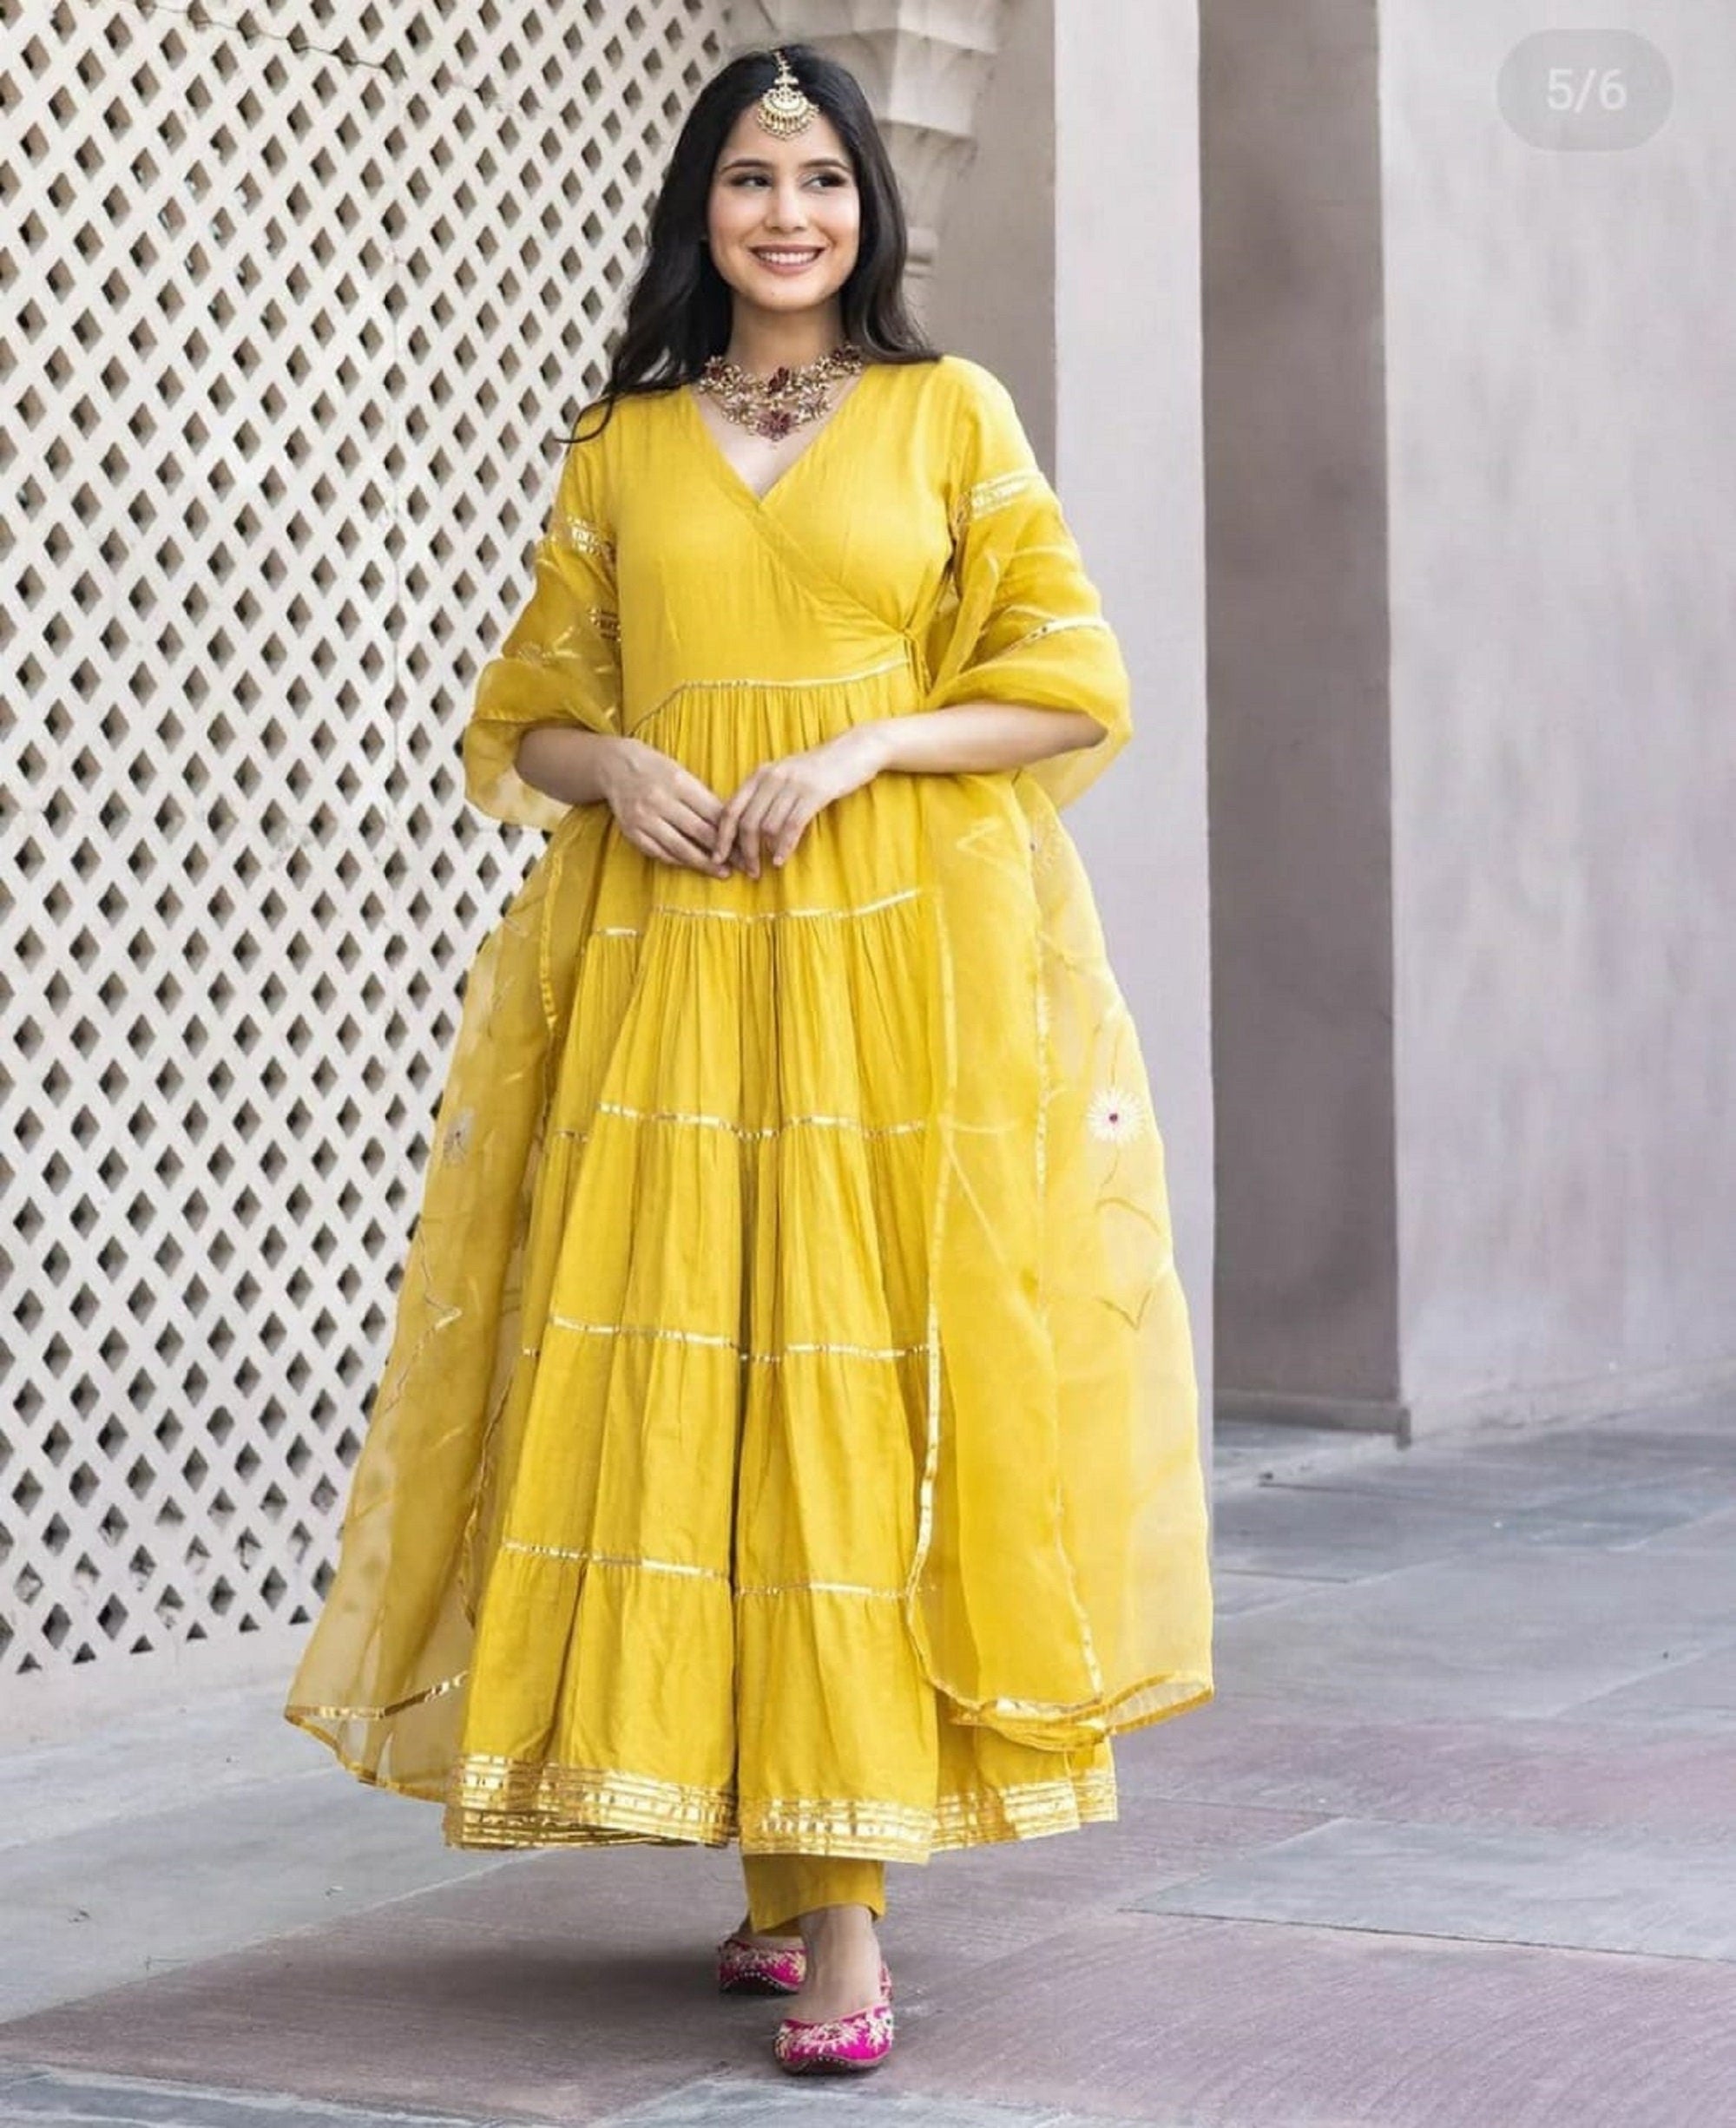 You can look your best for Diwali in 2022 with the latest Diwali outfits  for women at JOVI Fashion | Diwali outfits, Designer outfits woman, Clothes  for women